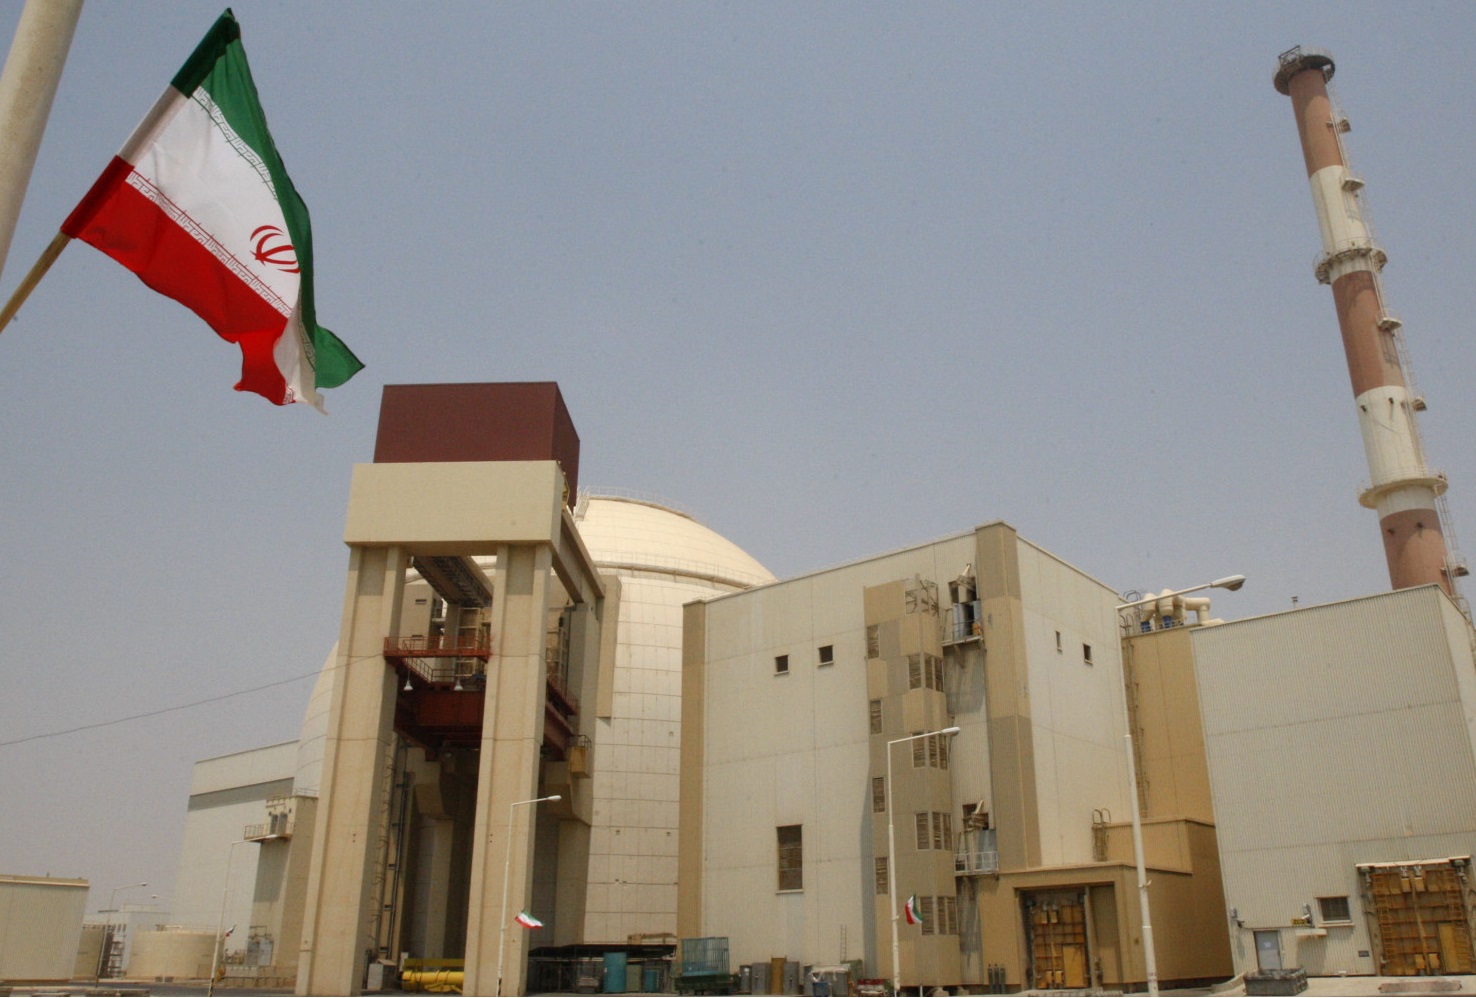 Iran cannot build a nuclear weapon if we
dismantle
its infrastructure